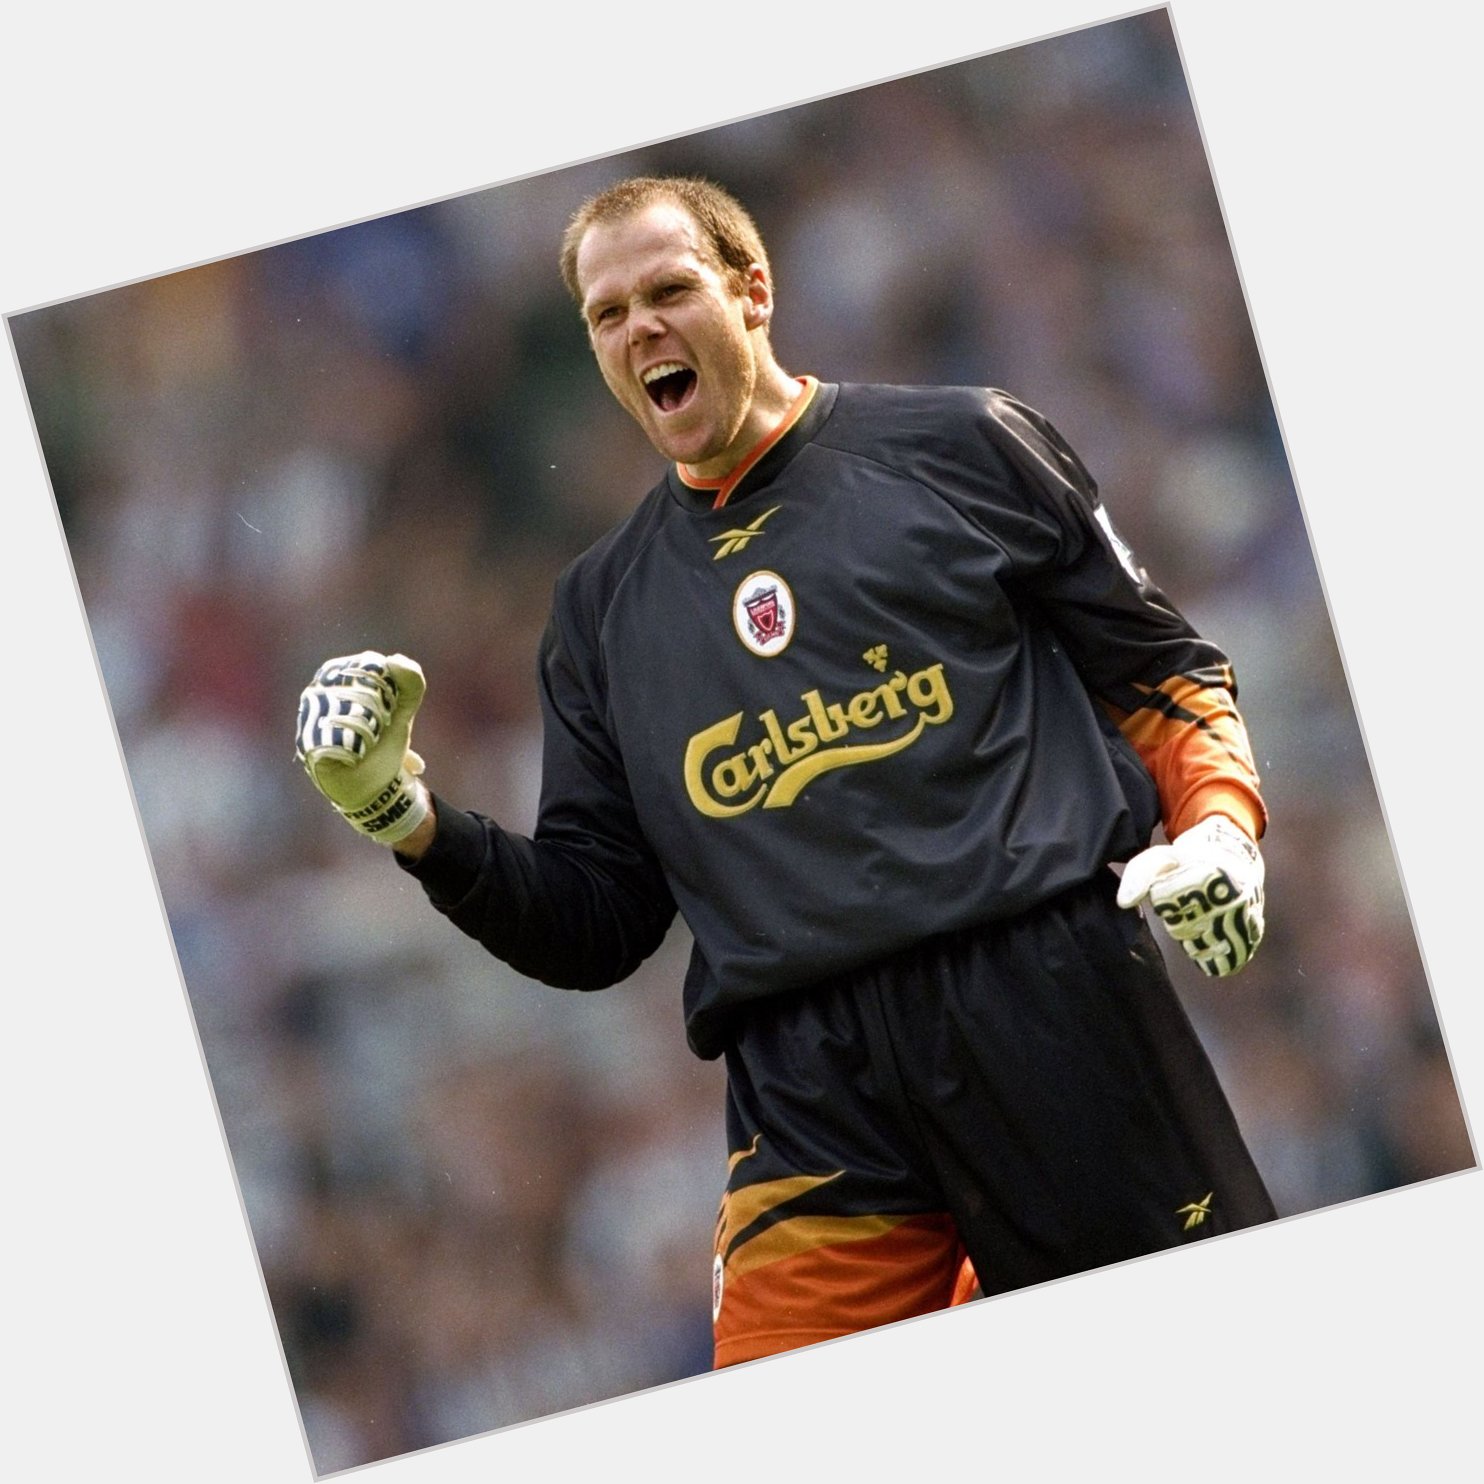 The first American to play for in the Premier League Happy birthday, Brad Friedel! 